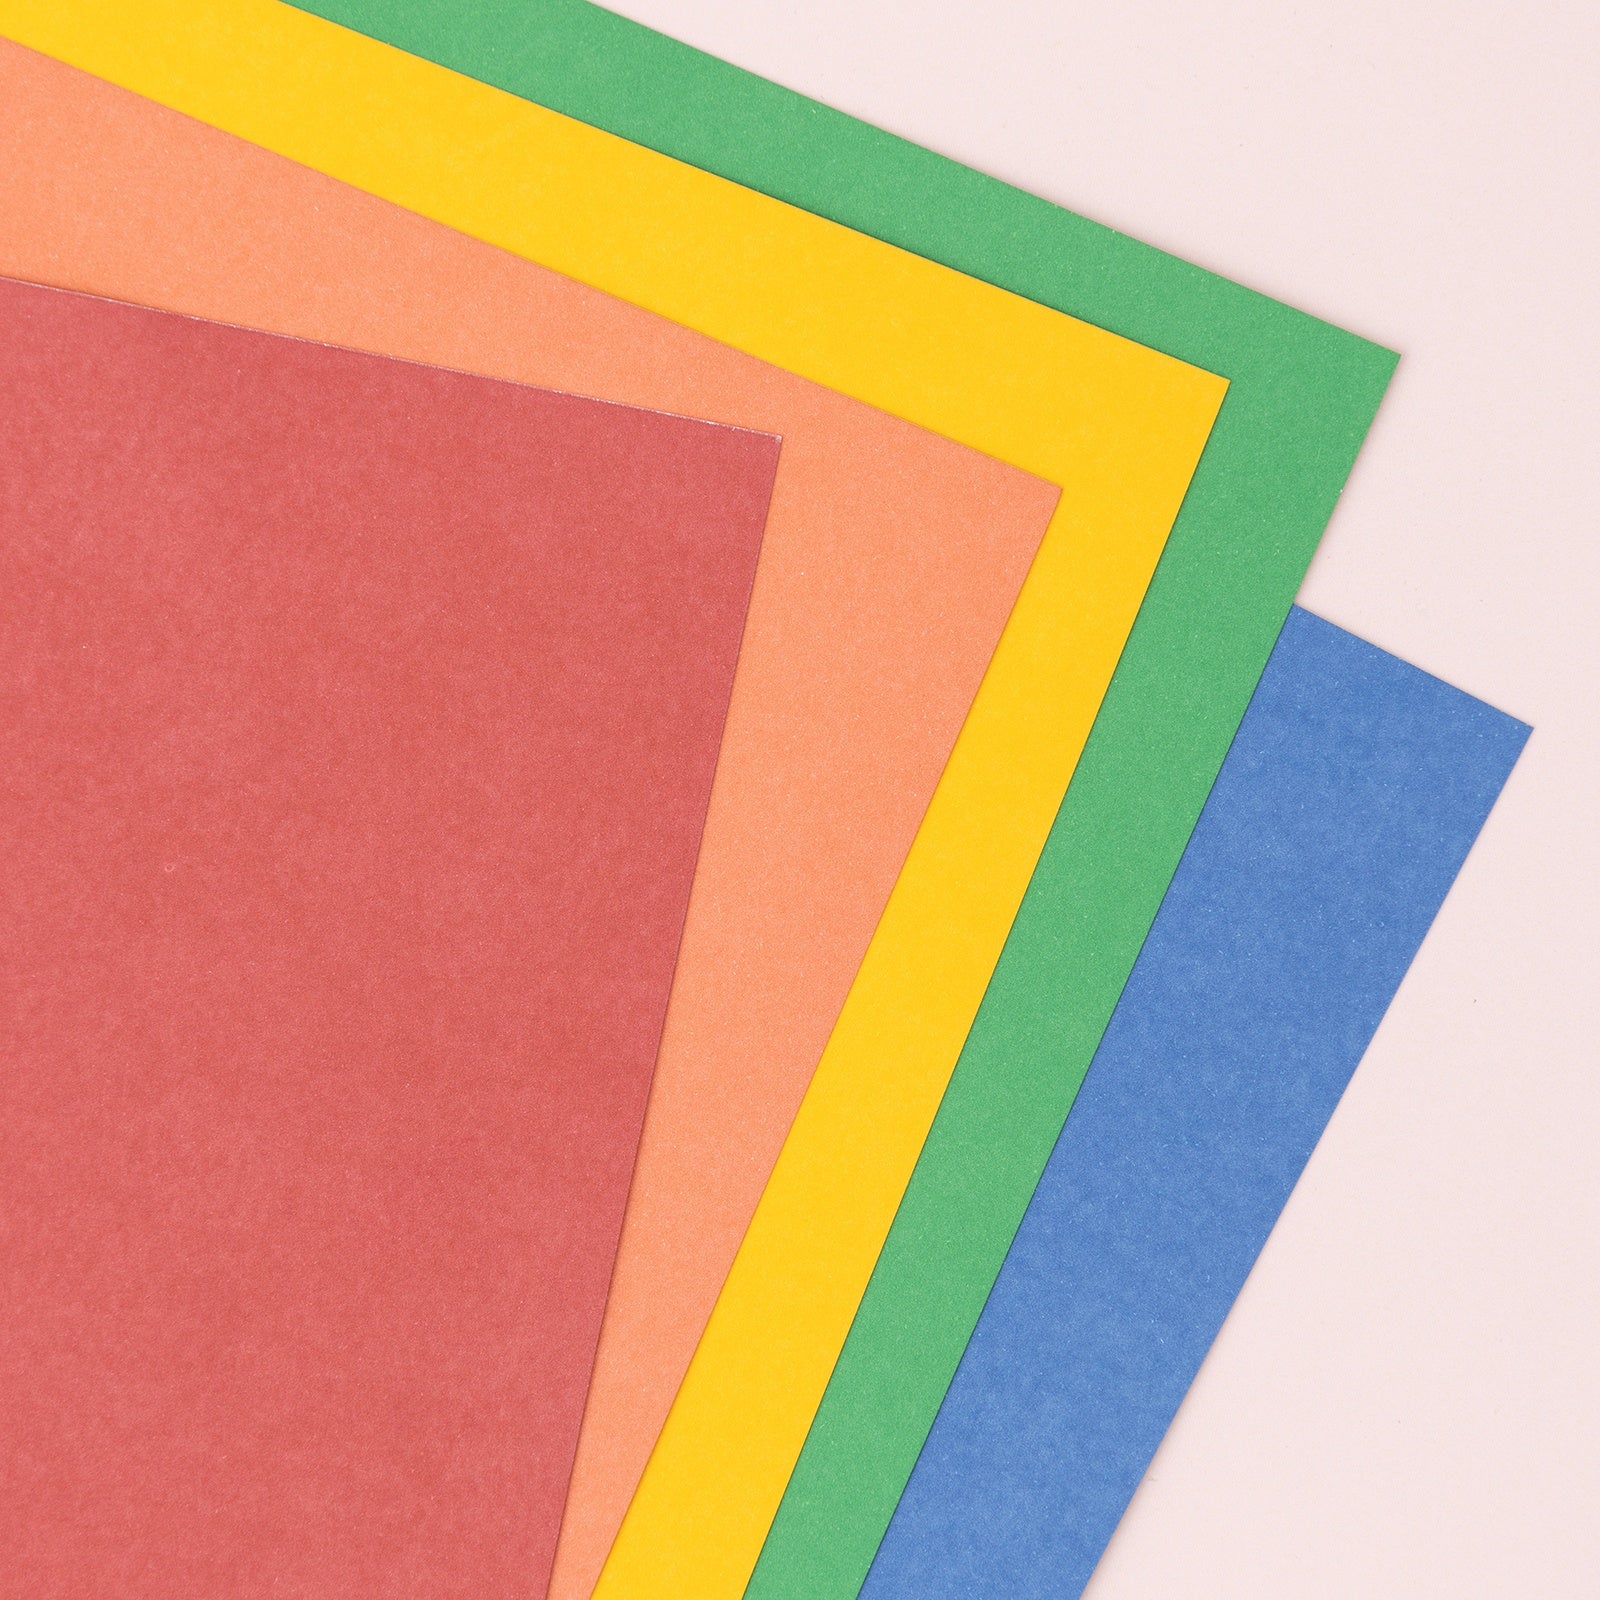 Colorbok Smooth Cardstock Paper Pad, Primary, 12 x 12